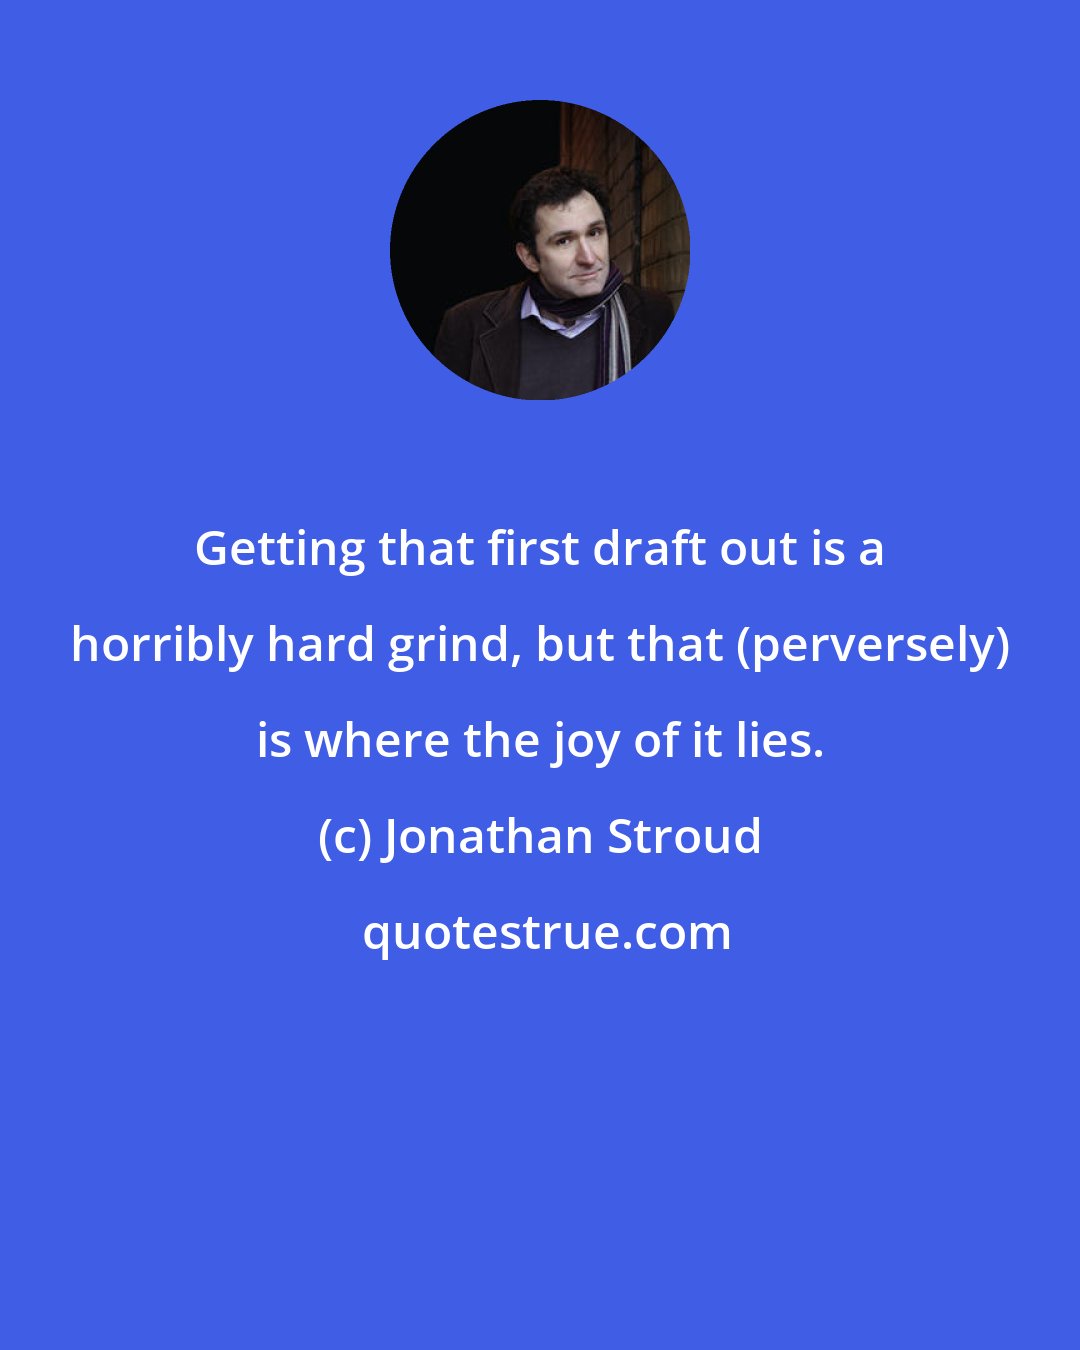 Jonathan Stroud: Getting that first draft out is a horribly hard grind, but that (perversely) is where the joy of it lies.